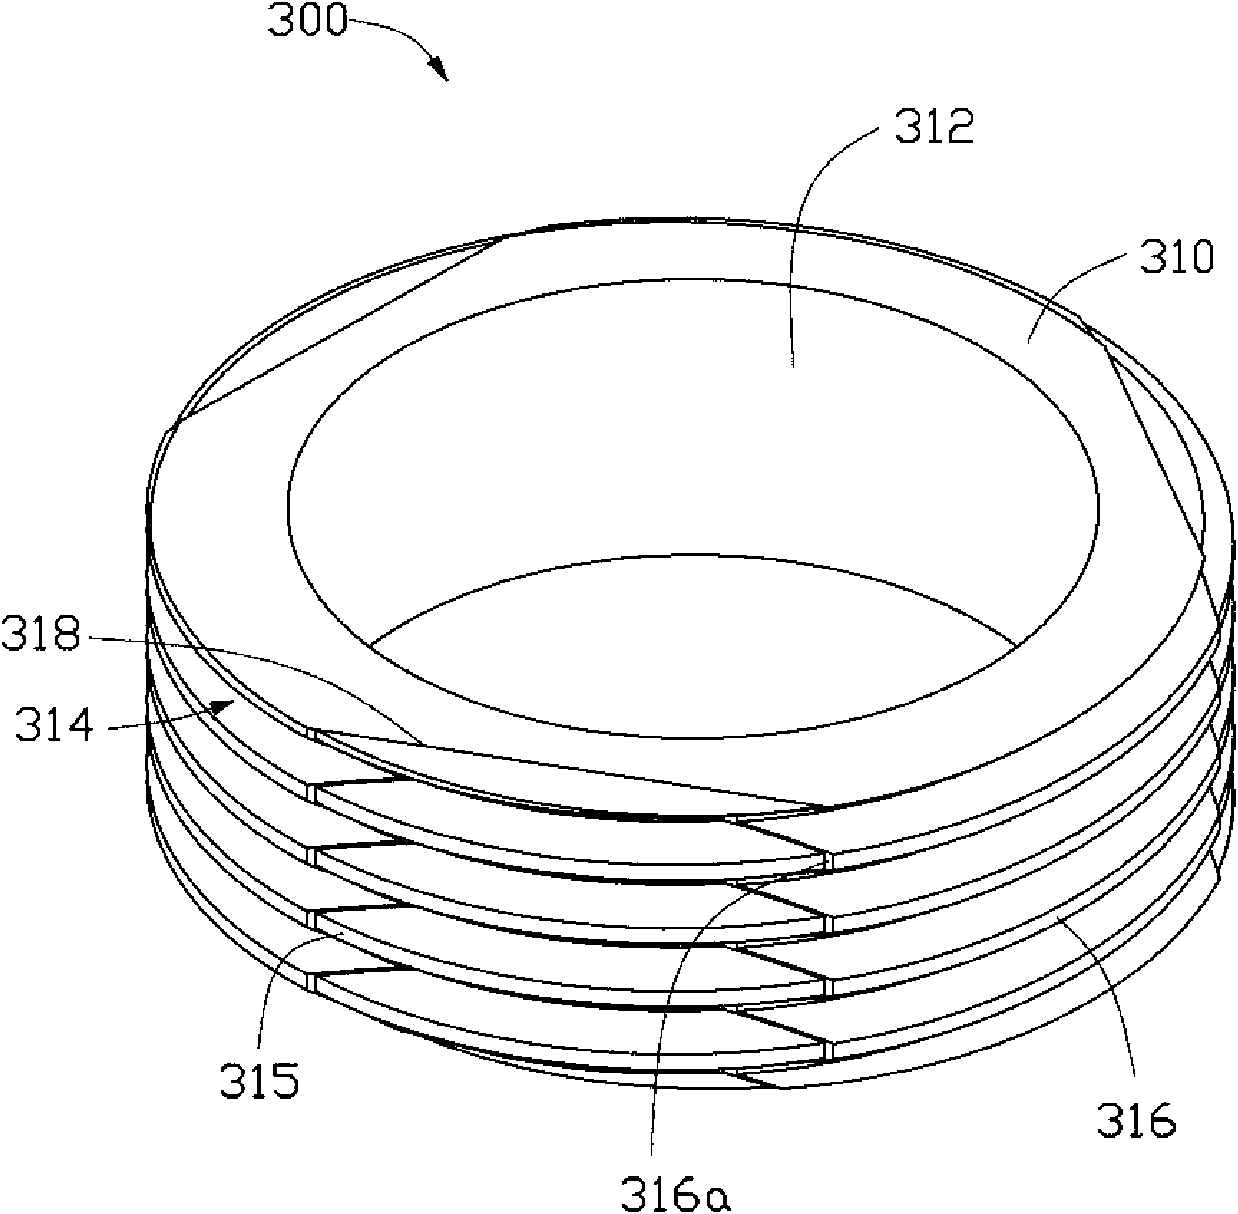 Lens cone and camera lens module thereof